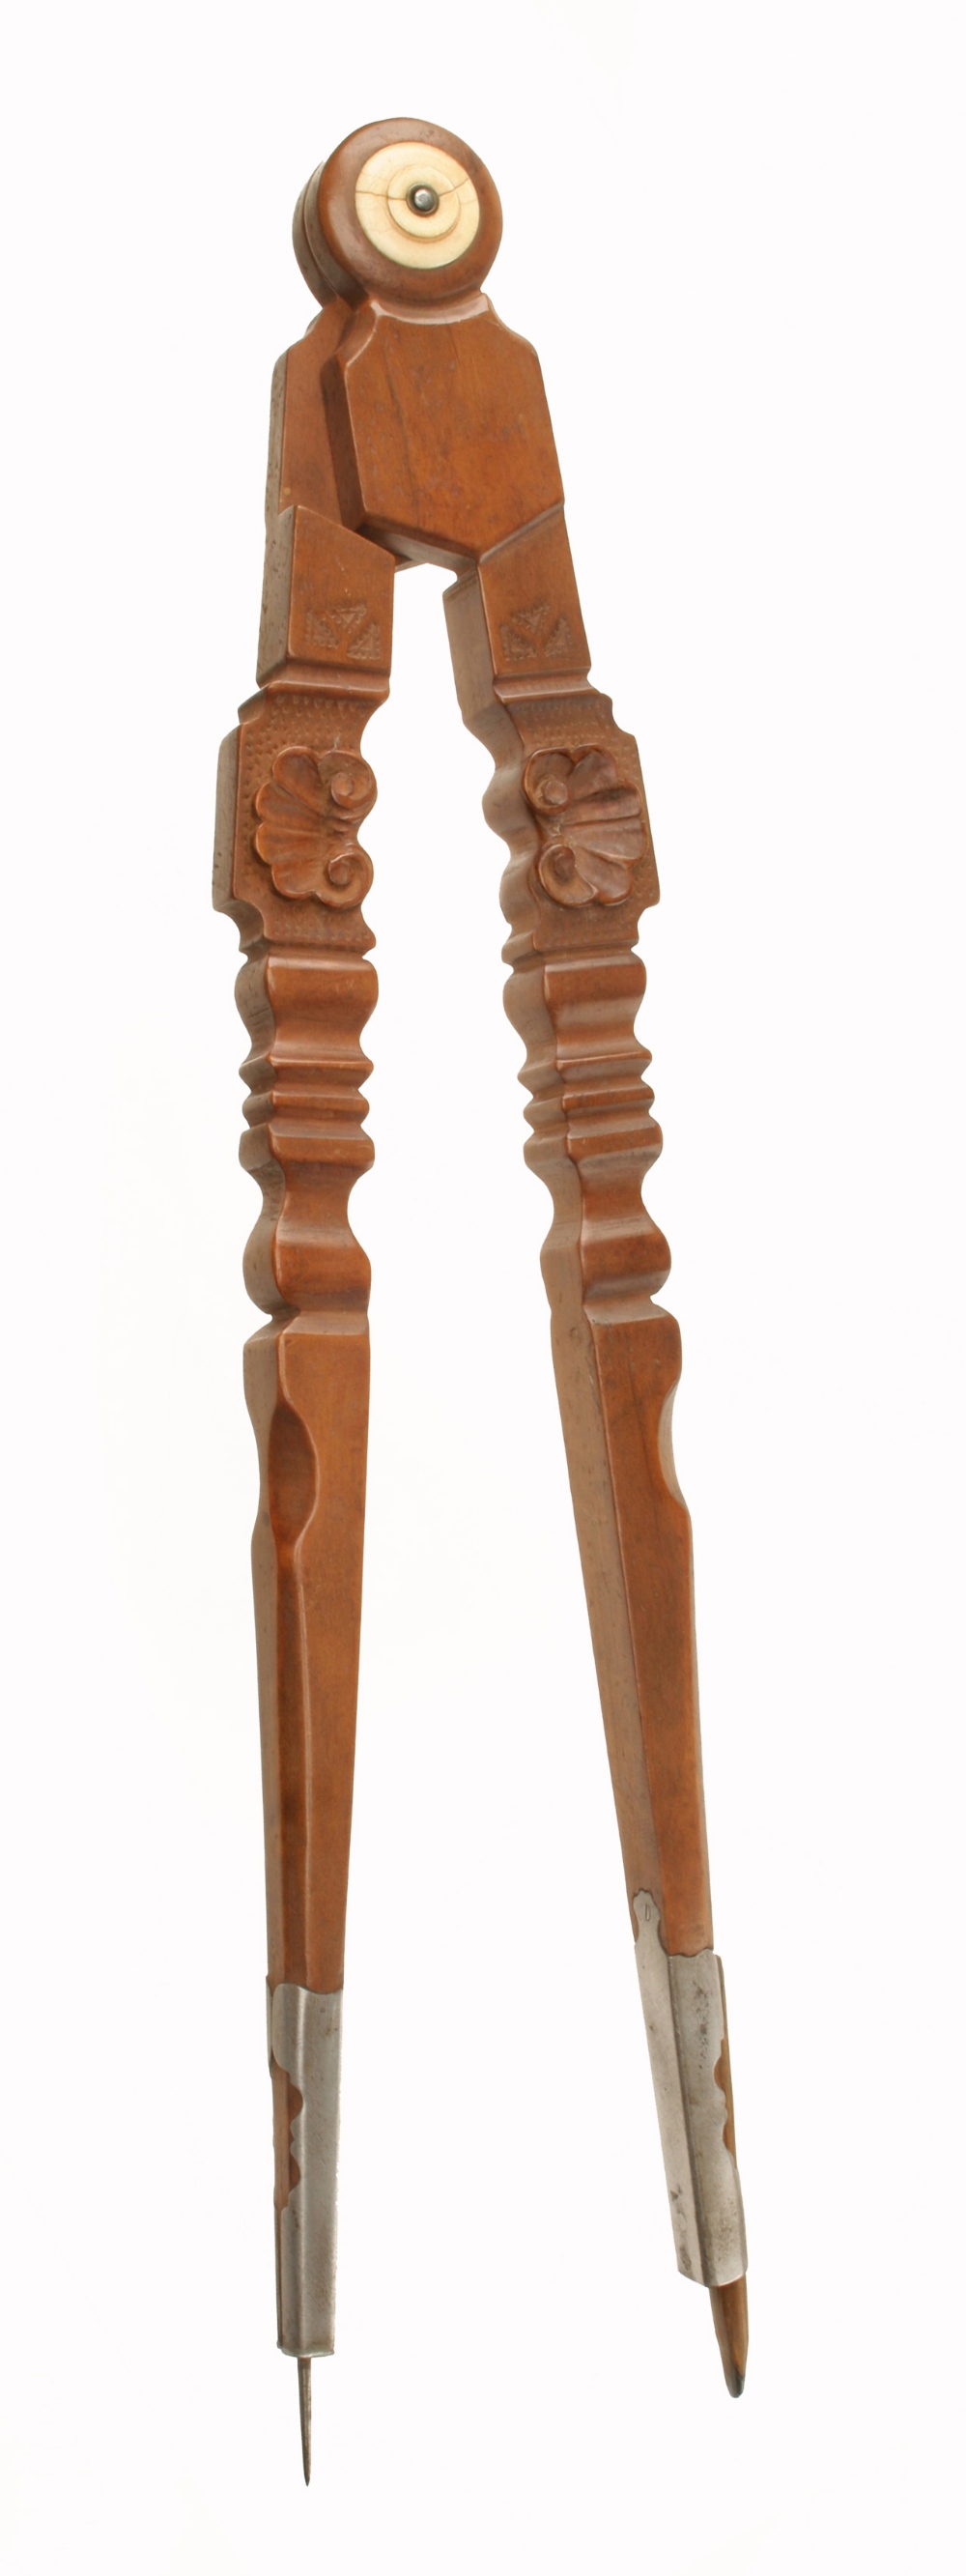 A magnificent pair of early European cherrywood dividers with superbly carved 15" legs with shell